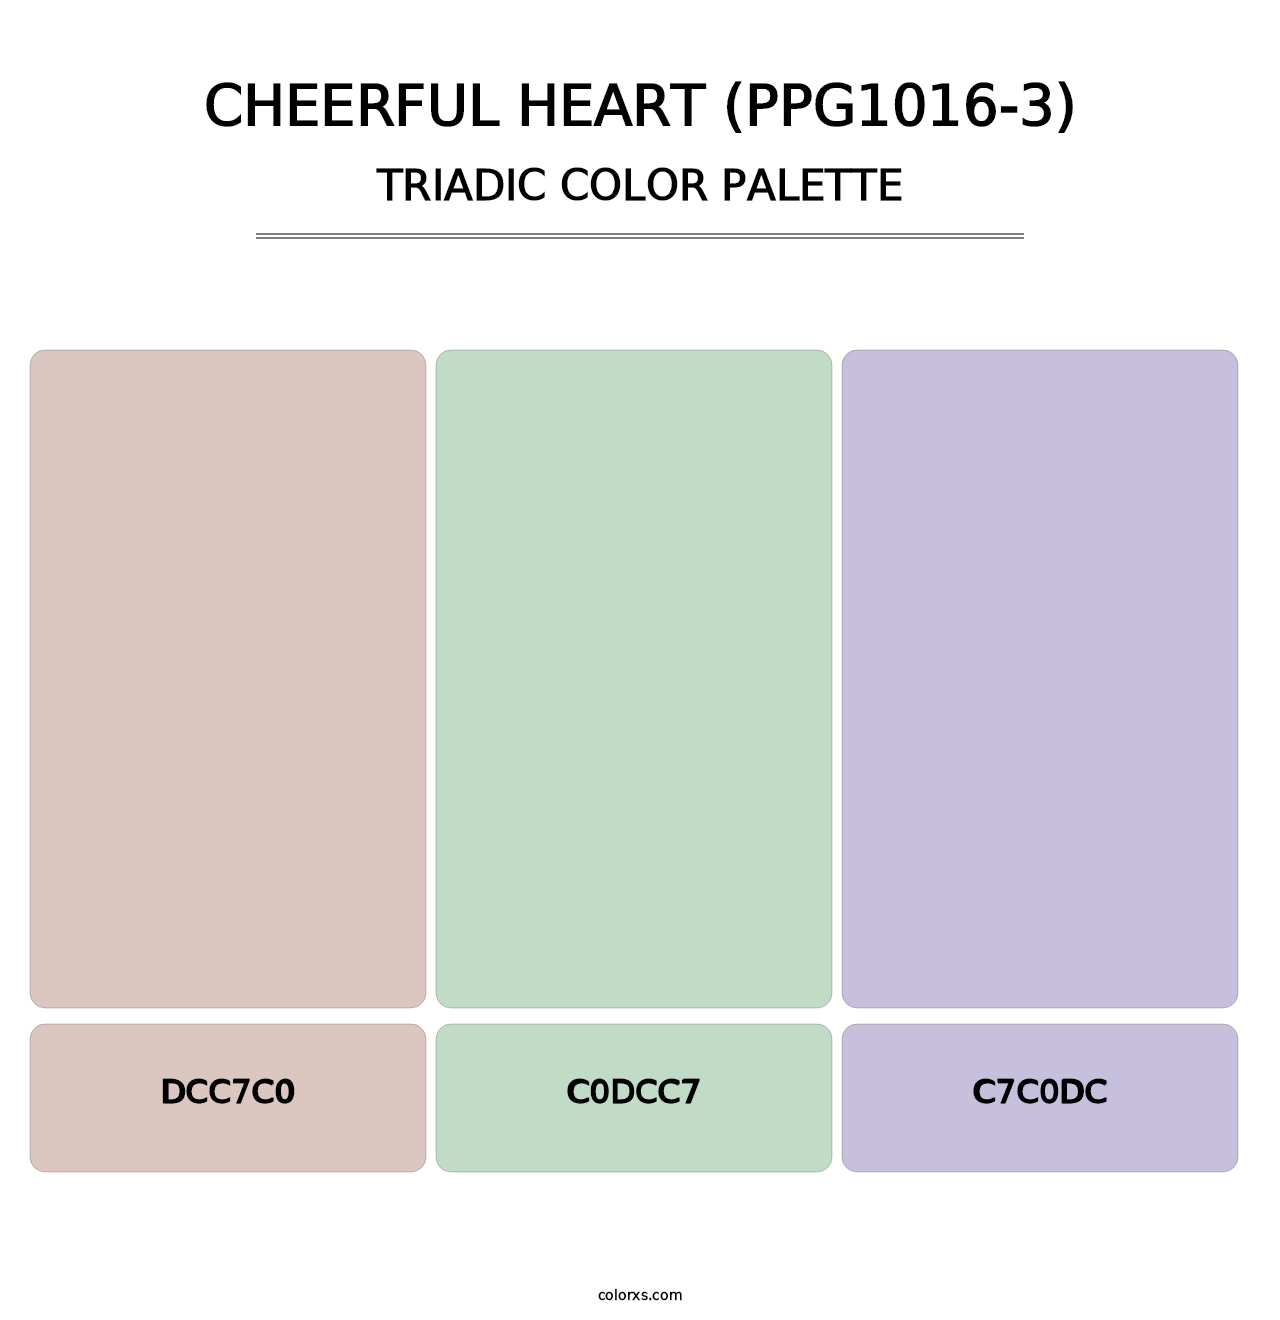 Cheerful Heart (PPG1016-3) - Triadic Color Palette